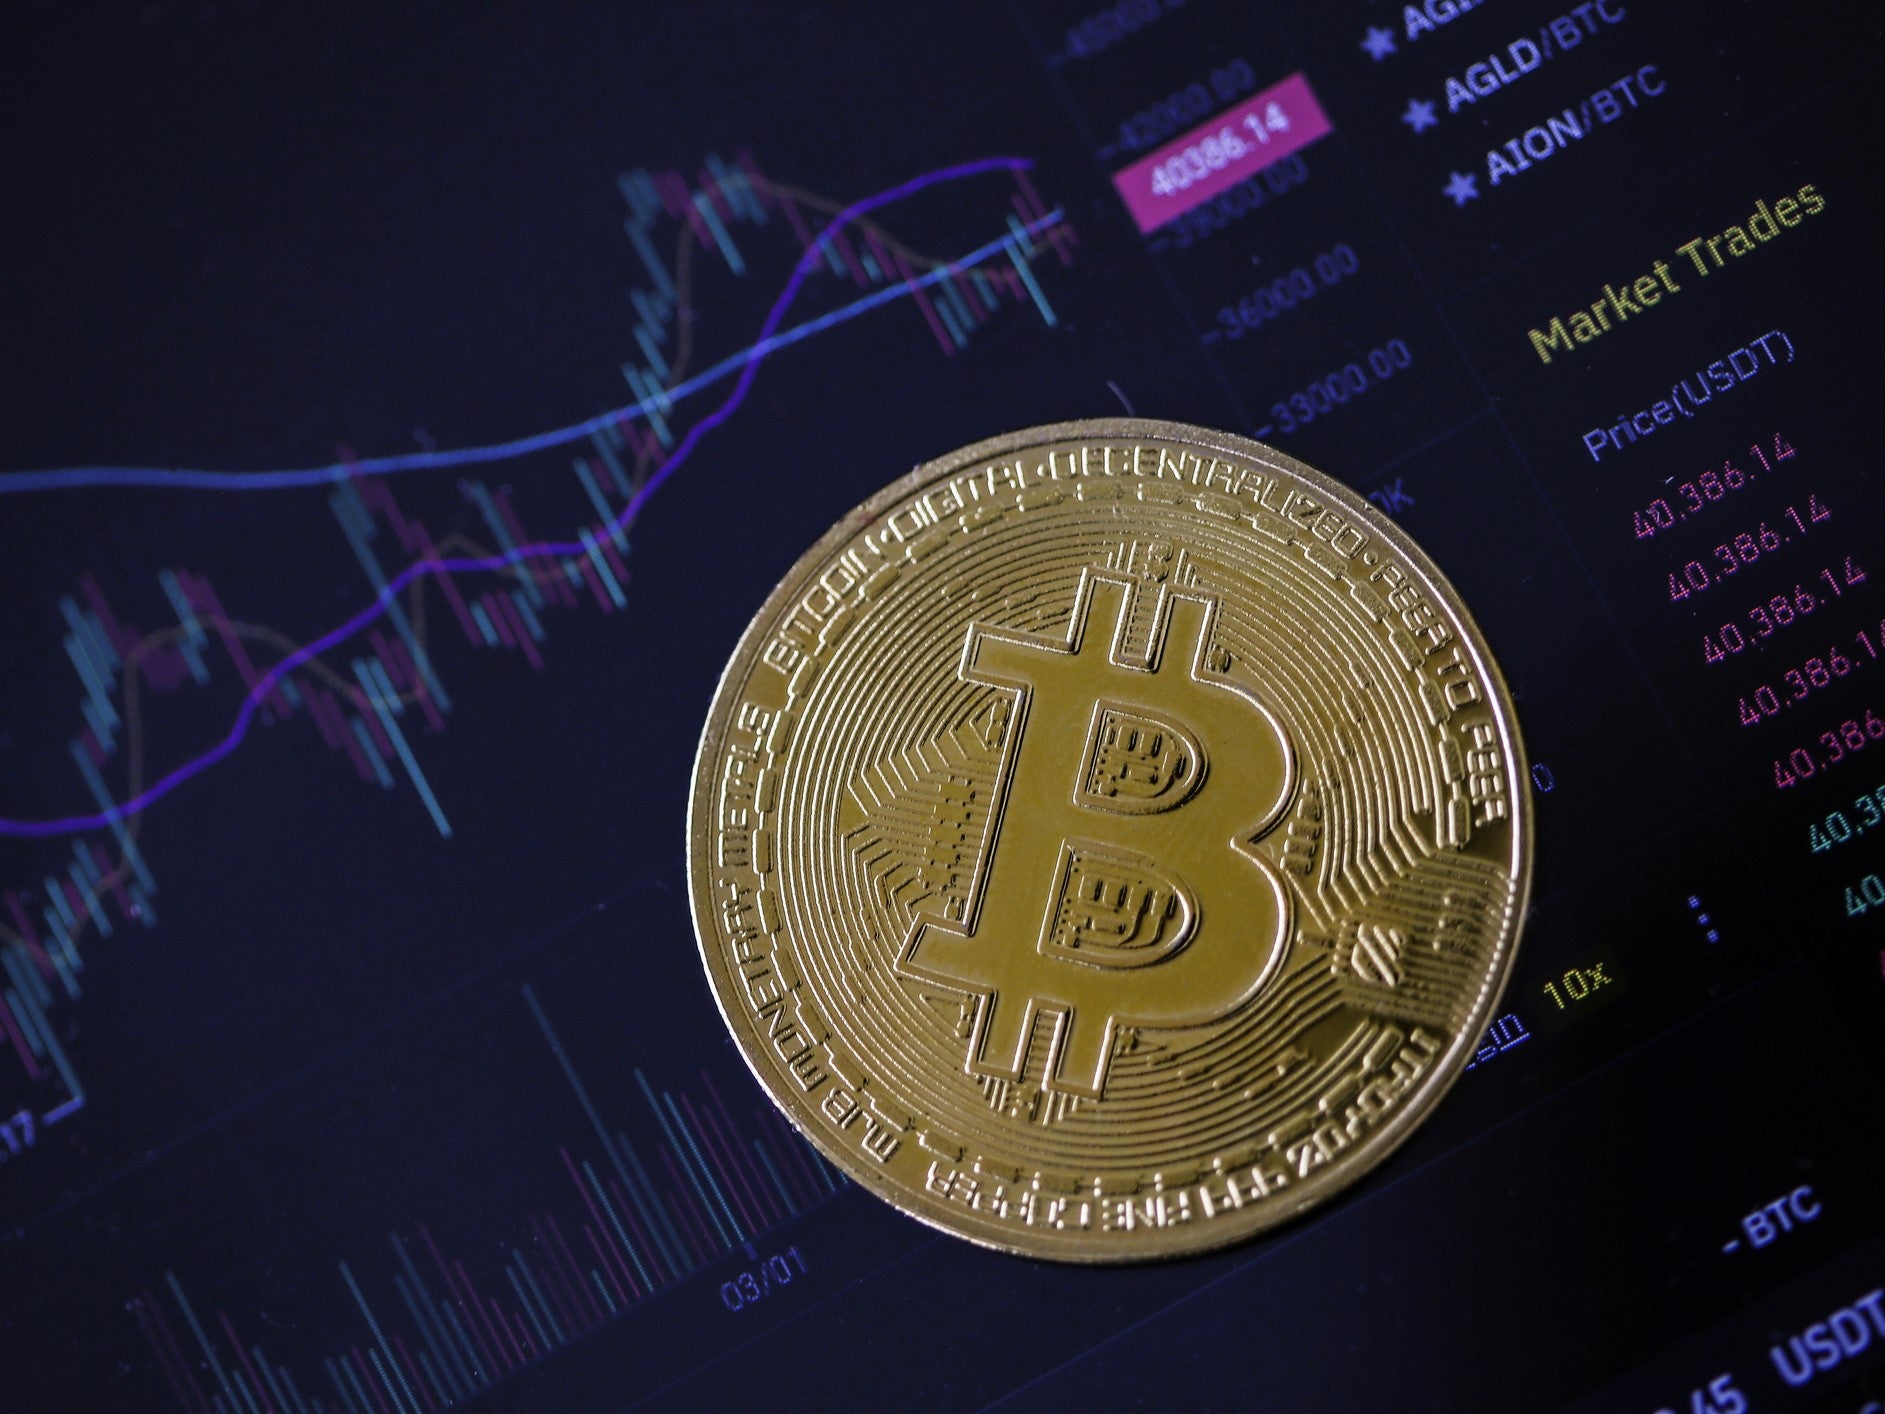 Bitcoin suffered a price slump at the start of March after a strong start to 2023